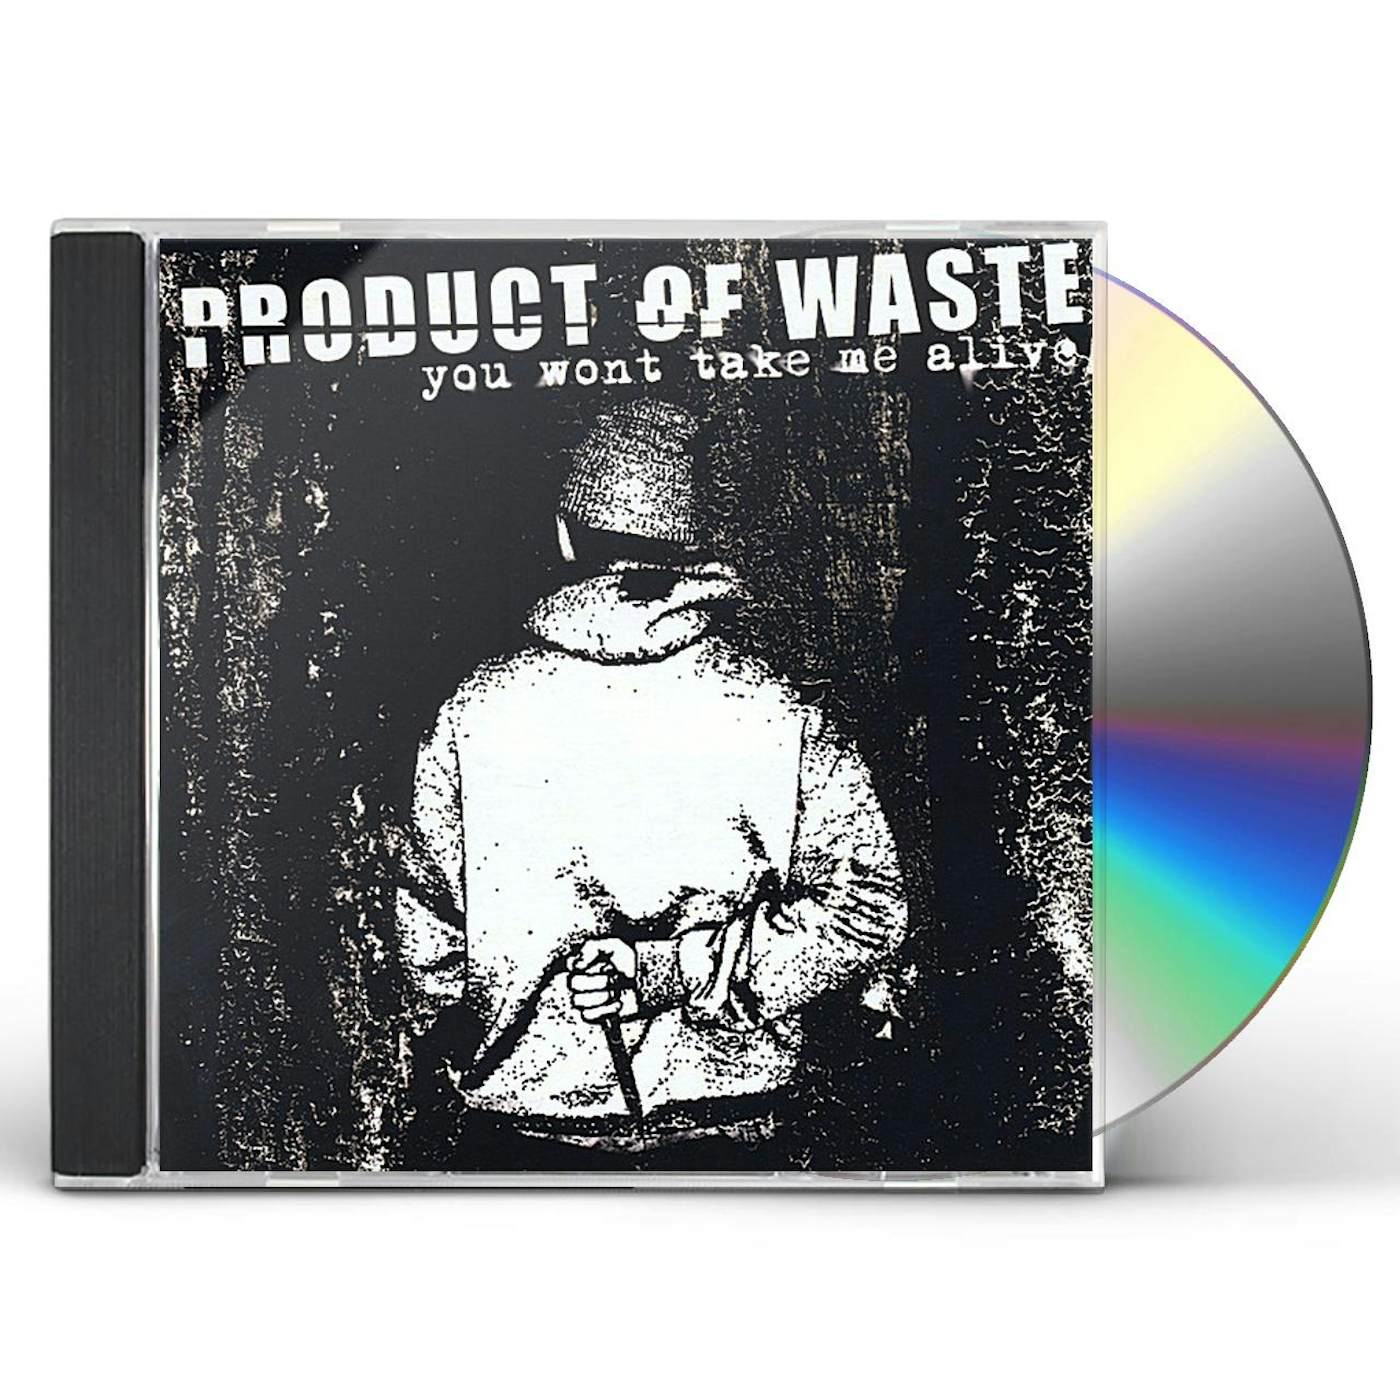 Product of Waste YOU WON'T TAKE ME ALIVE CD